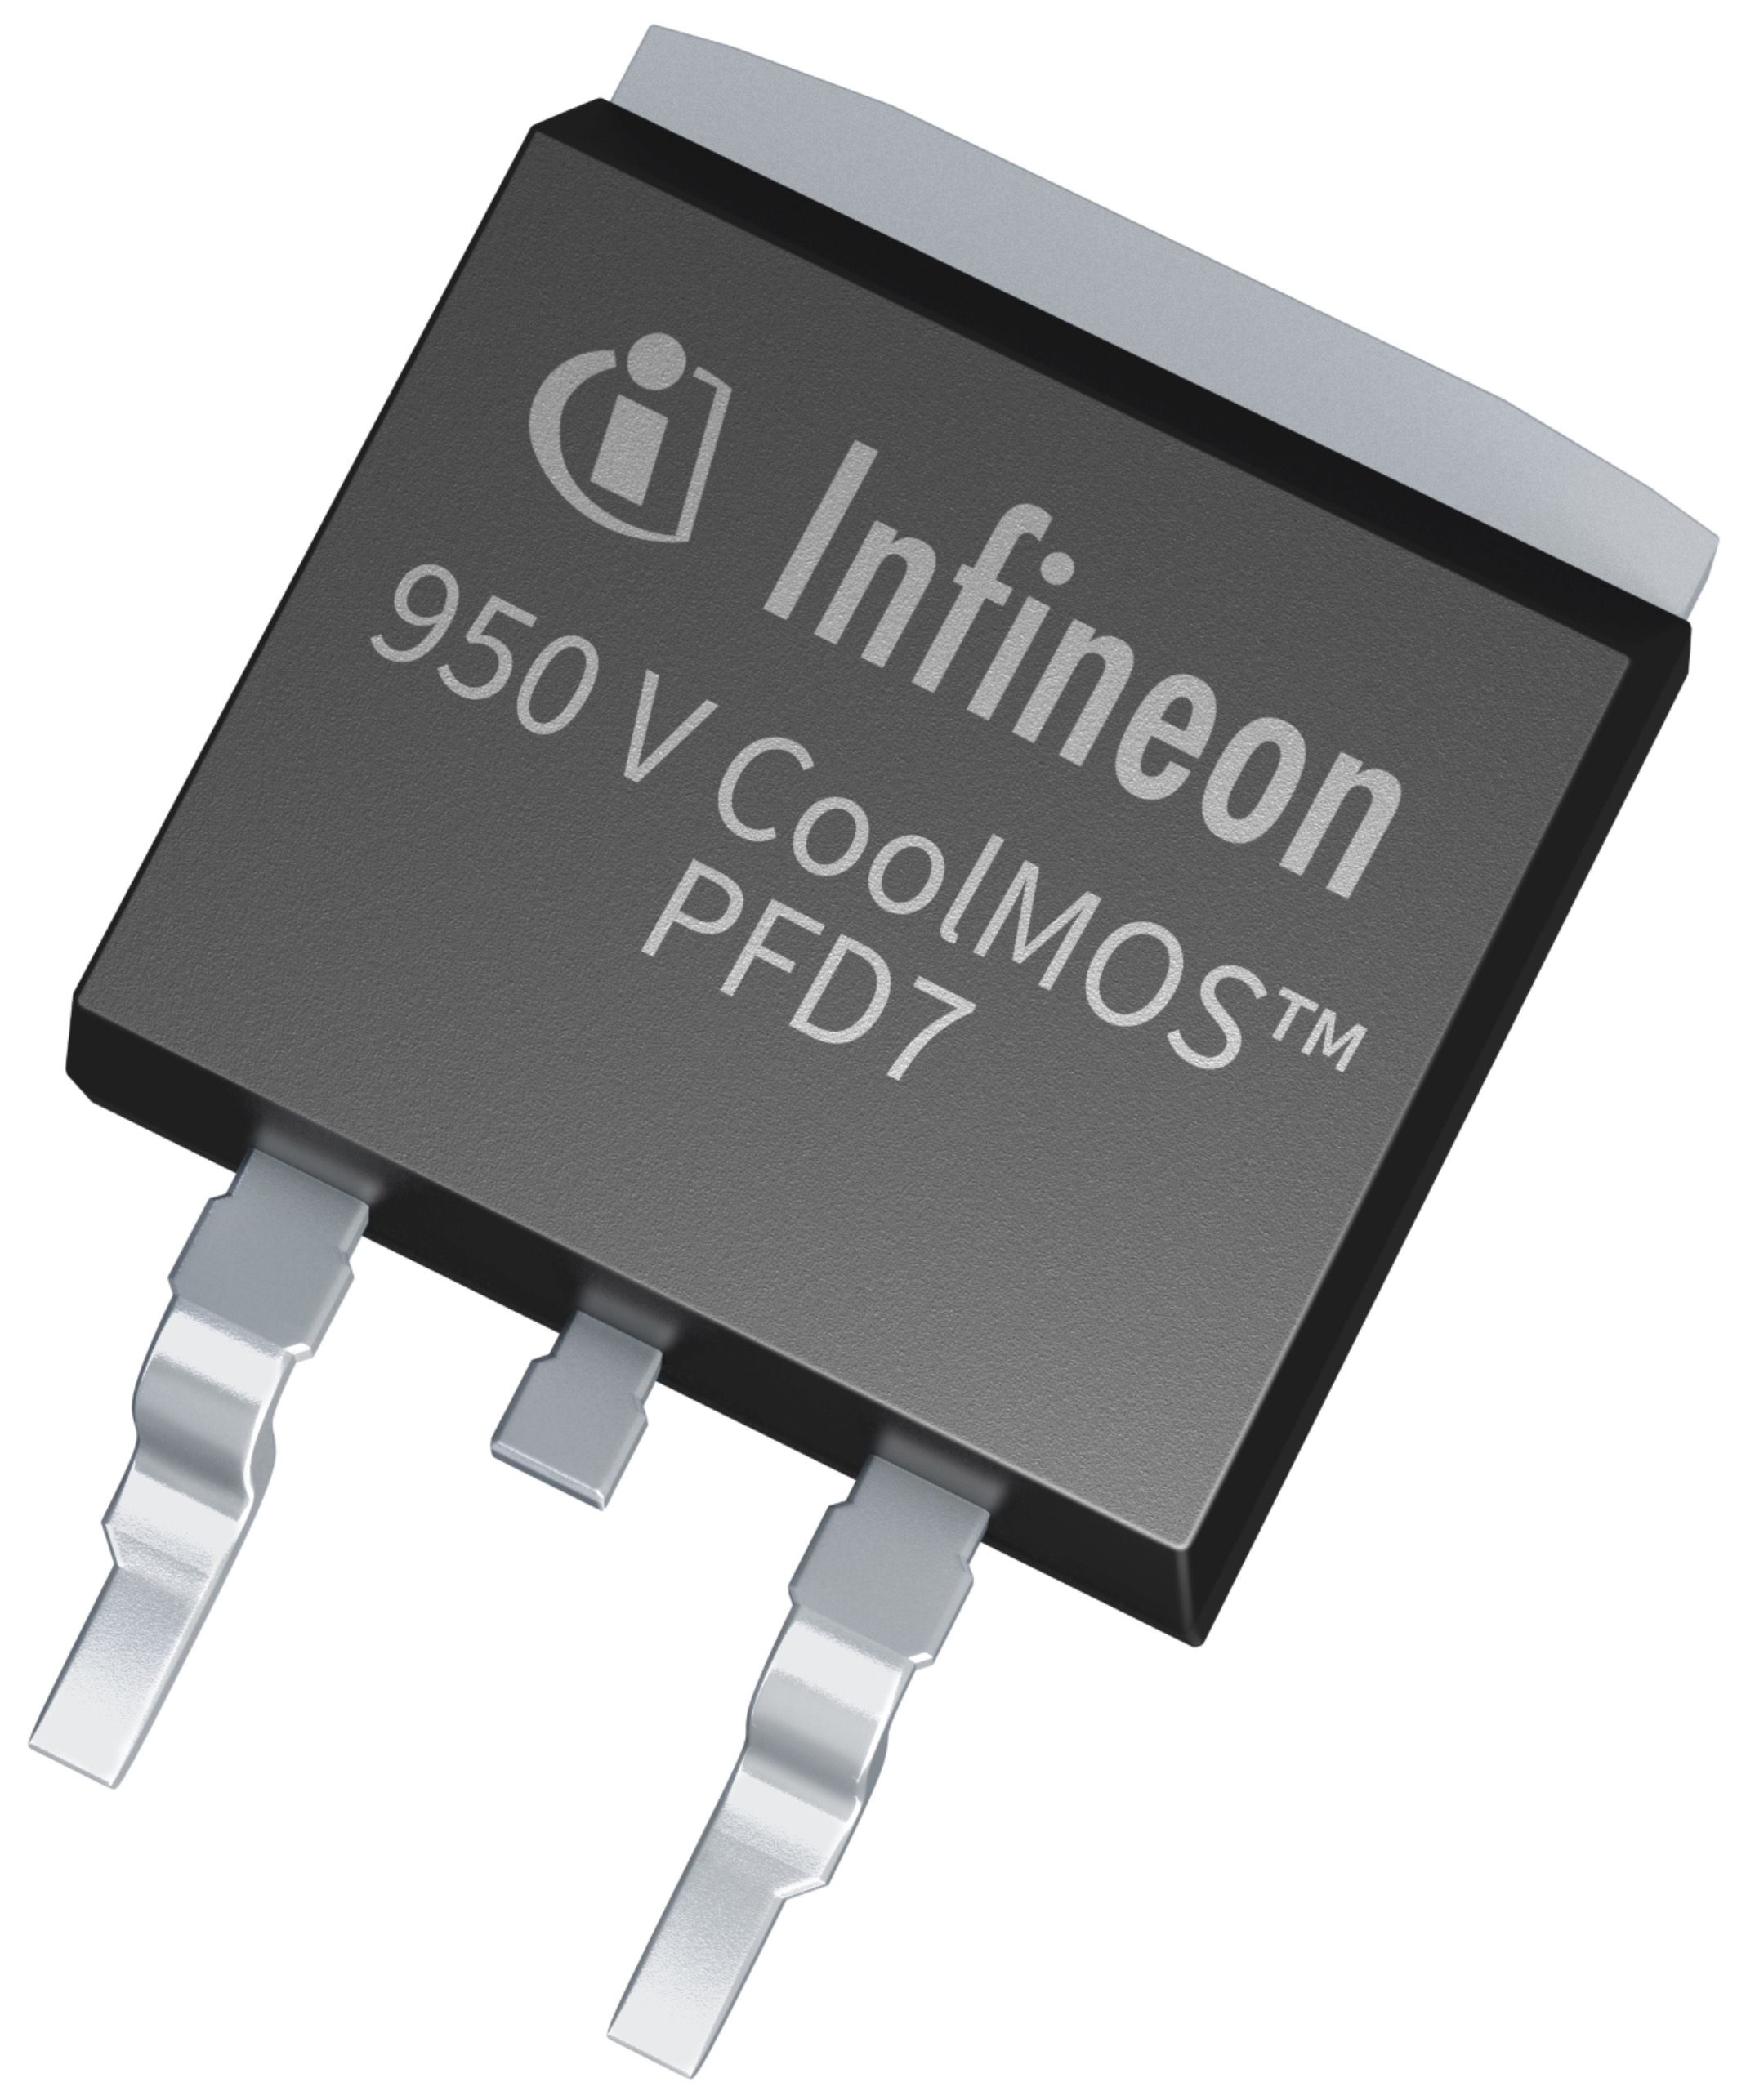 Infineon Launches New 950 V Superjunction MOSFETs